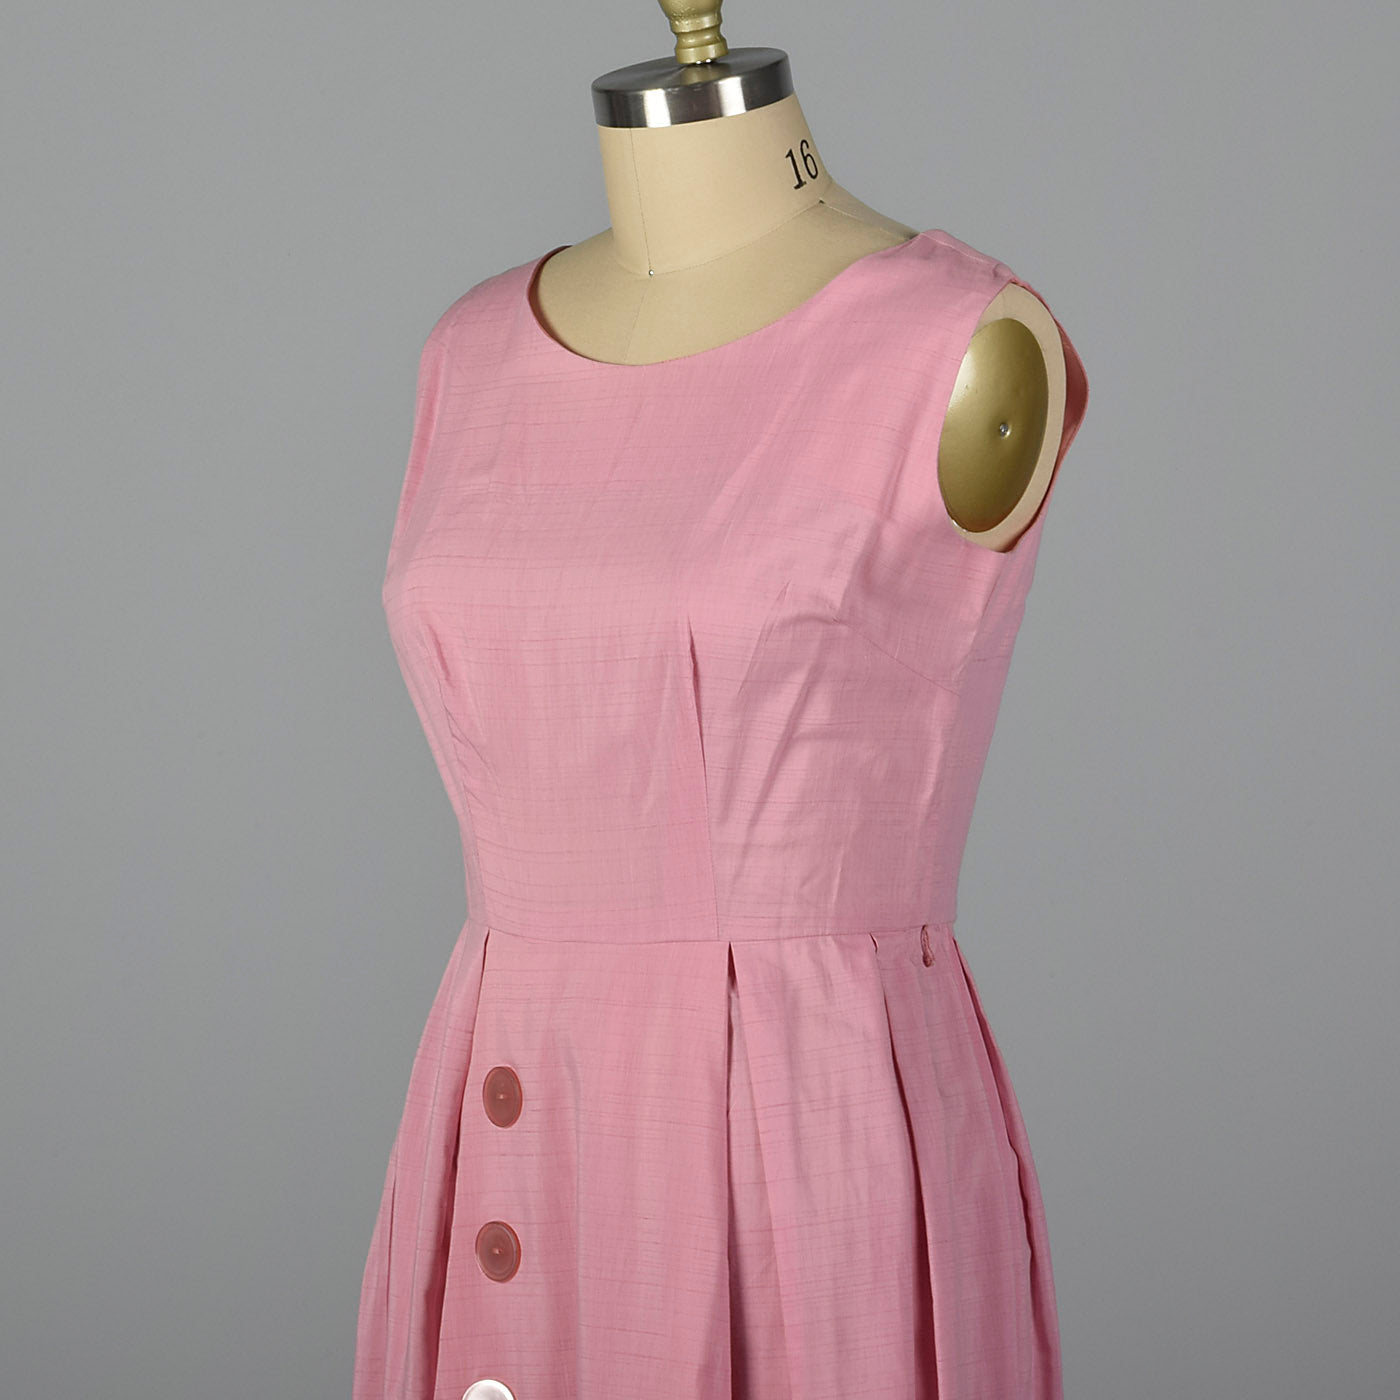 1950s Pink Polished Cotton Dress with Large Buttons